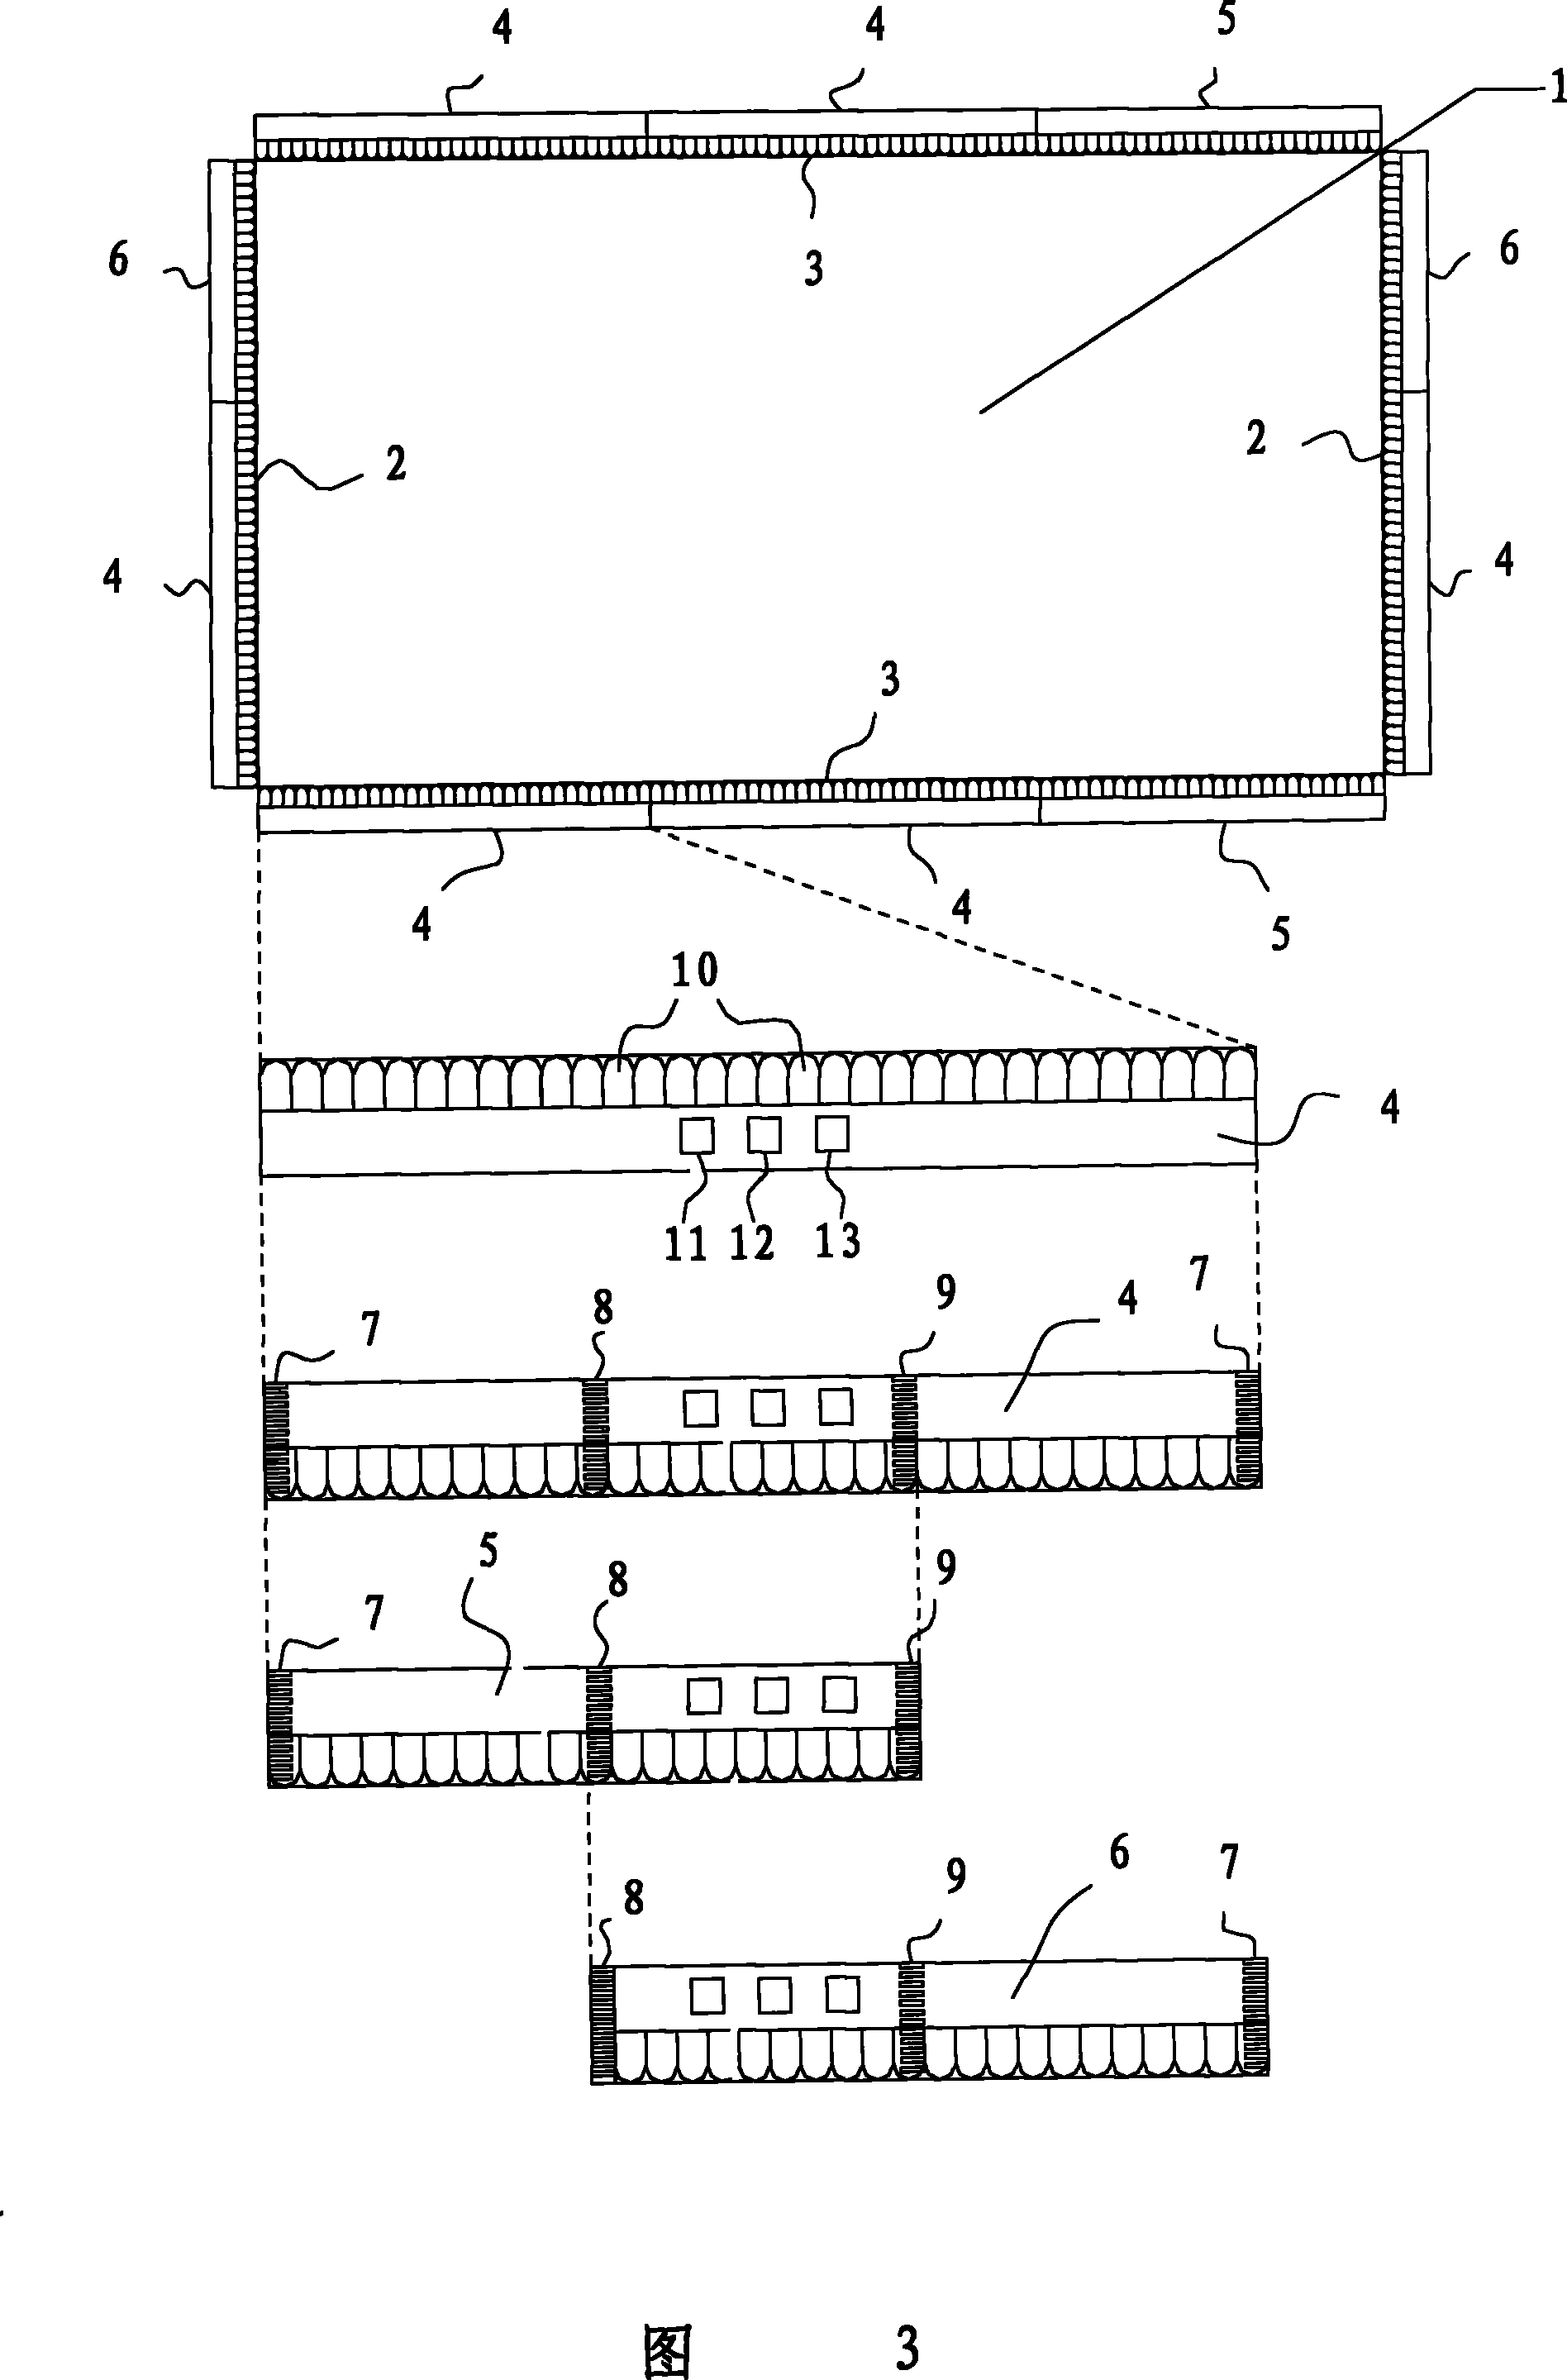 Infrared transmitting or receiving circuit board unit and infrared touch screen